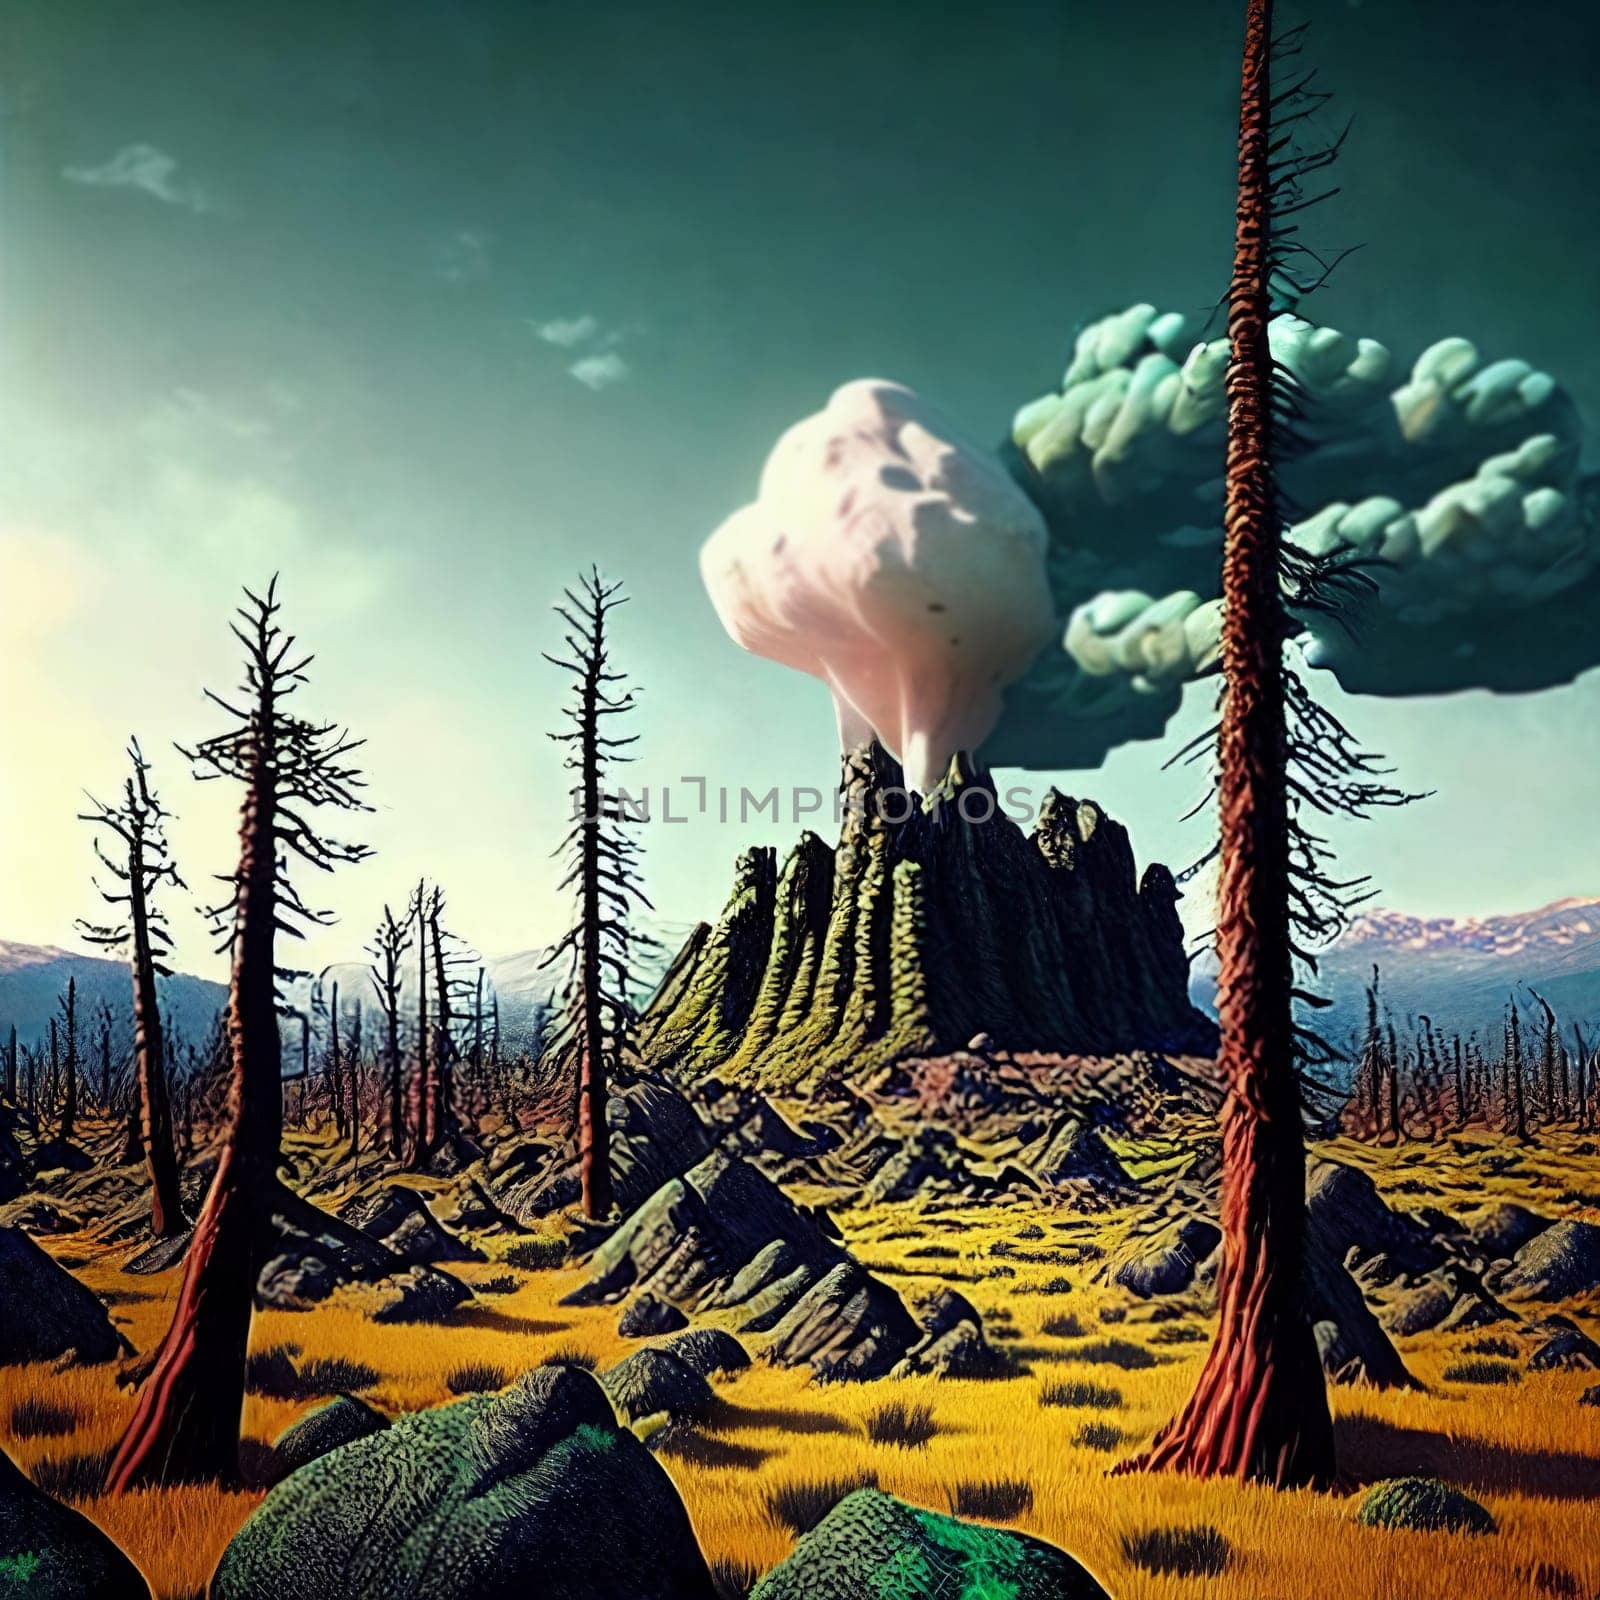 Post-nuclear Wilderness. Landscape transformed by nuclear fallout, featuring mutated flora, eerie rock formations, and a toxic sky tinged with ominous hues.